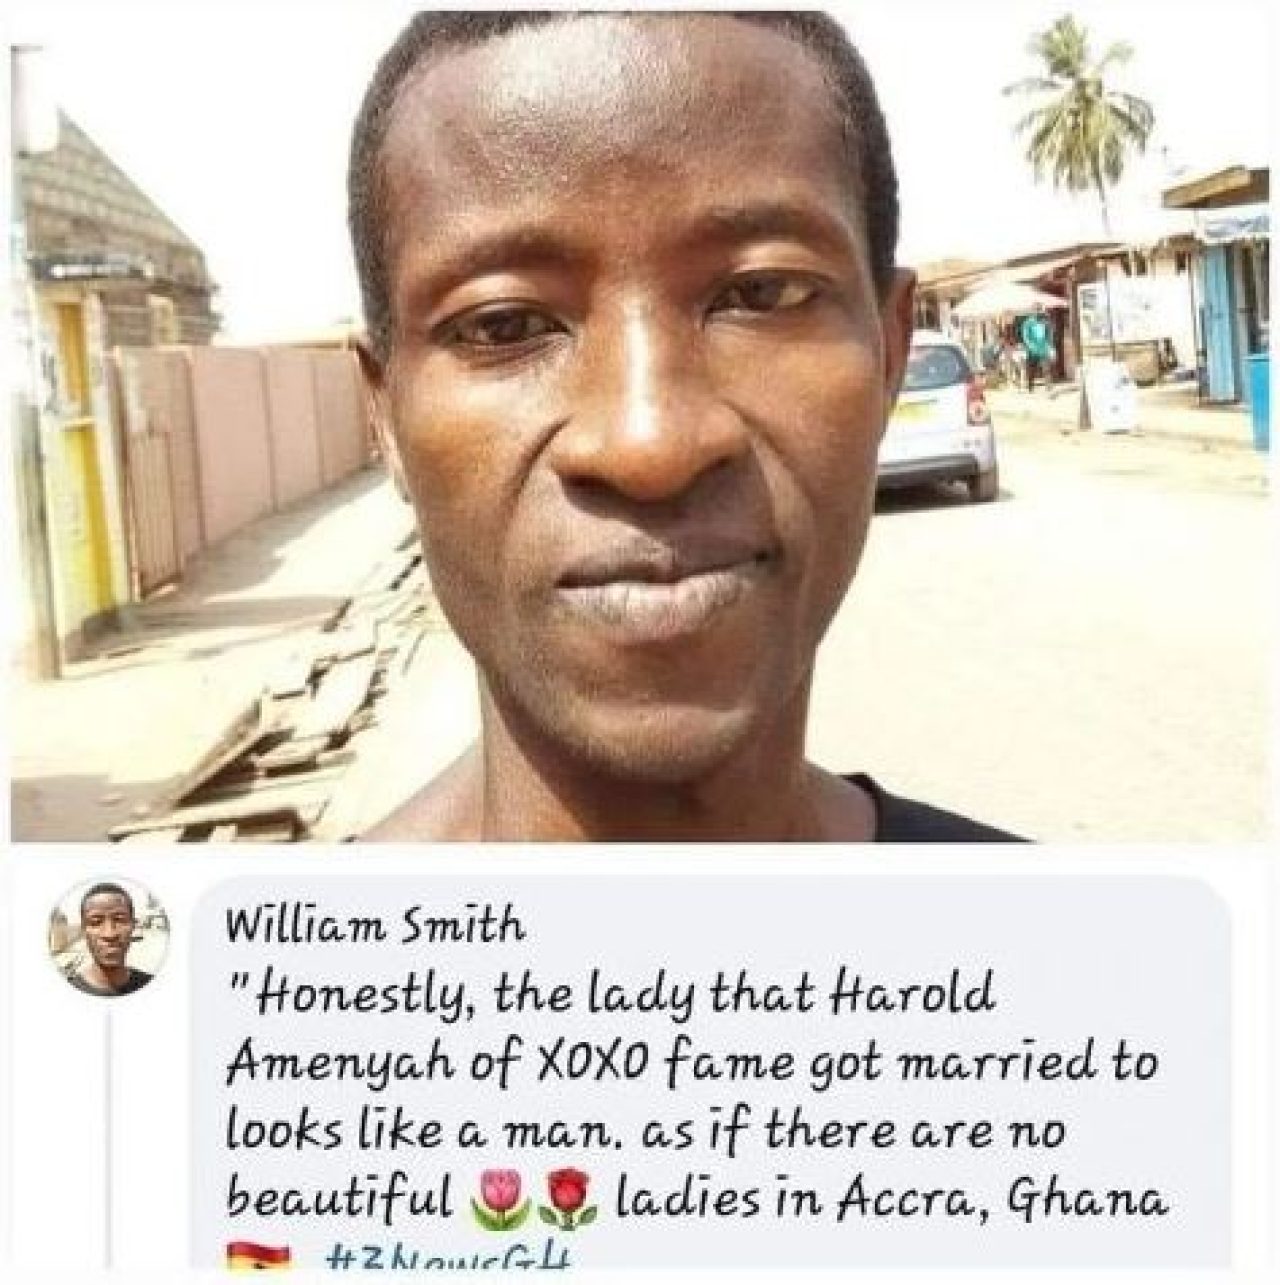 Harold Amenyah trolled for not marrying a ‘soo beautiful’ lady AdvertAfrica News on afronewswire.com: Amplifying Africa's Voice | afronewswire.com | Breaking News & Stories